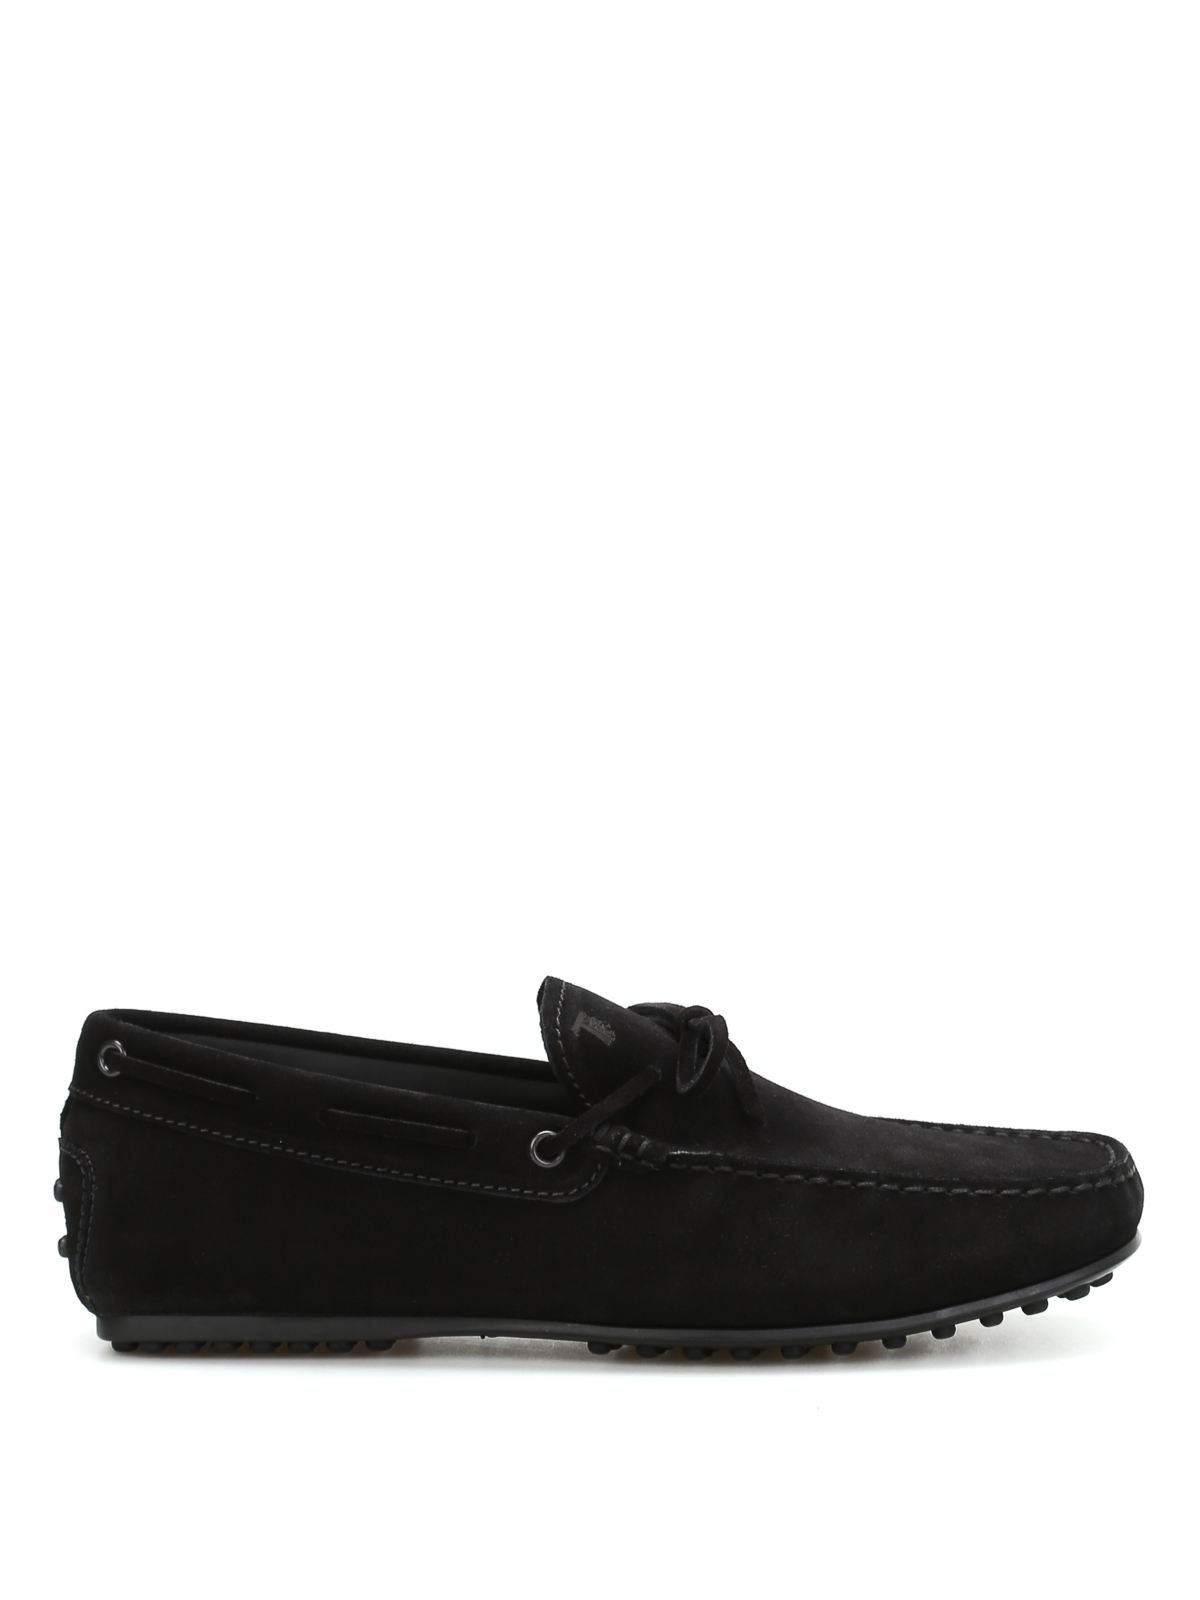 TOD'S Men's Leather Moccasins Black Moccasin Drivers Shoes Buckle Suede ...